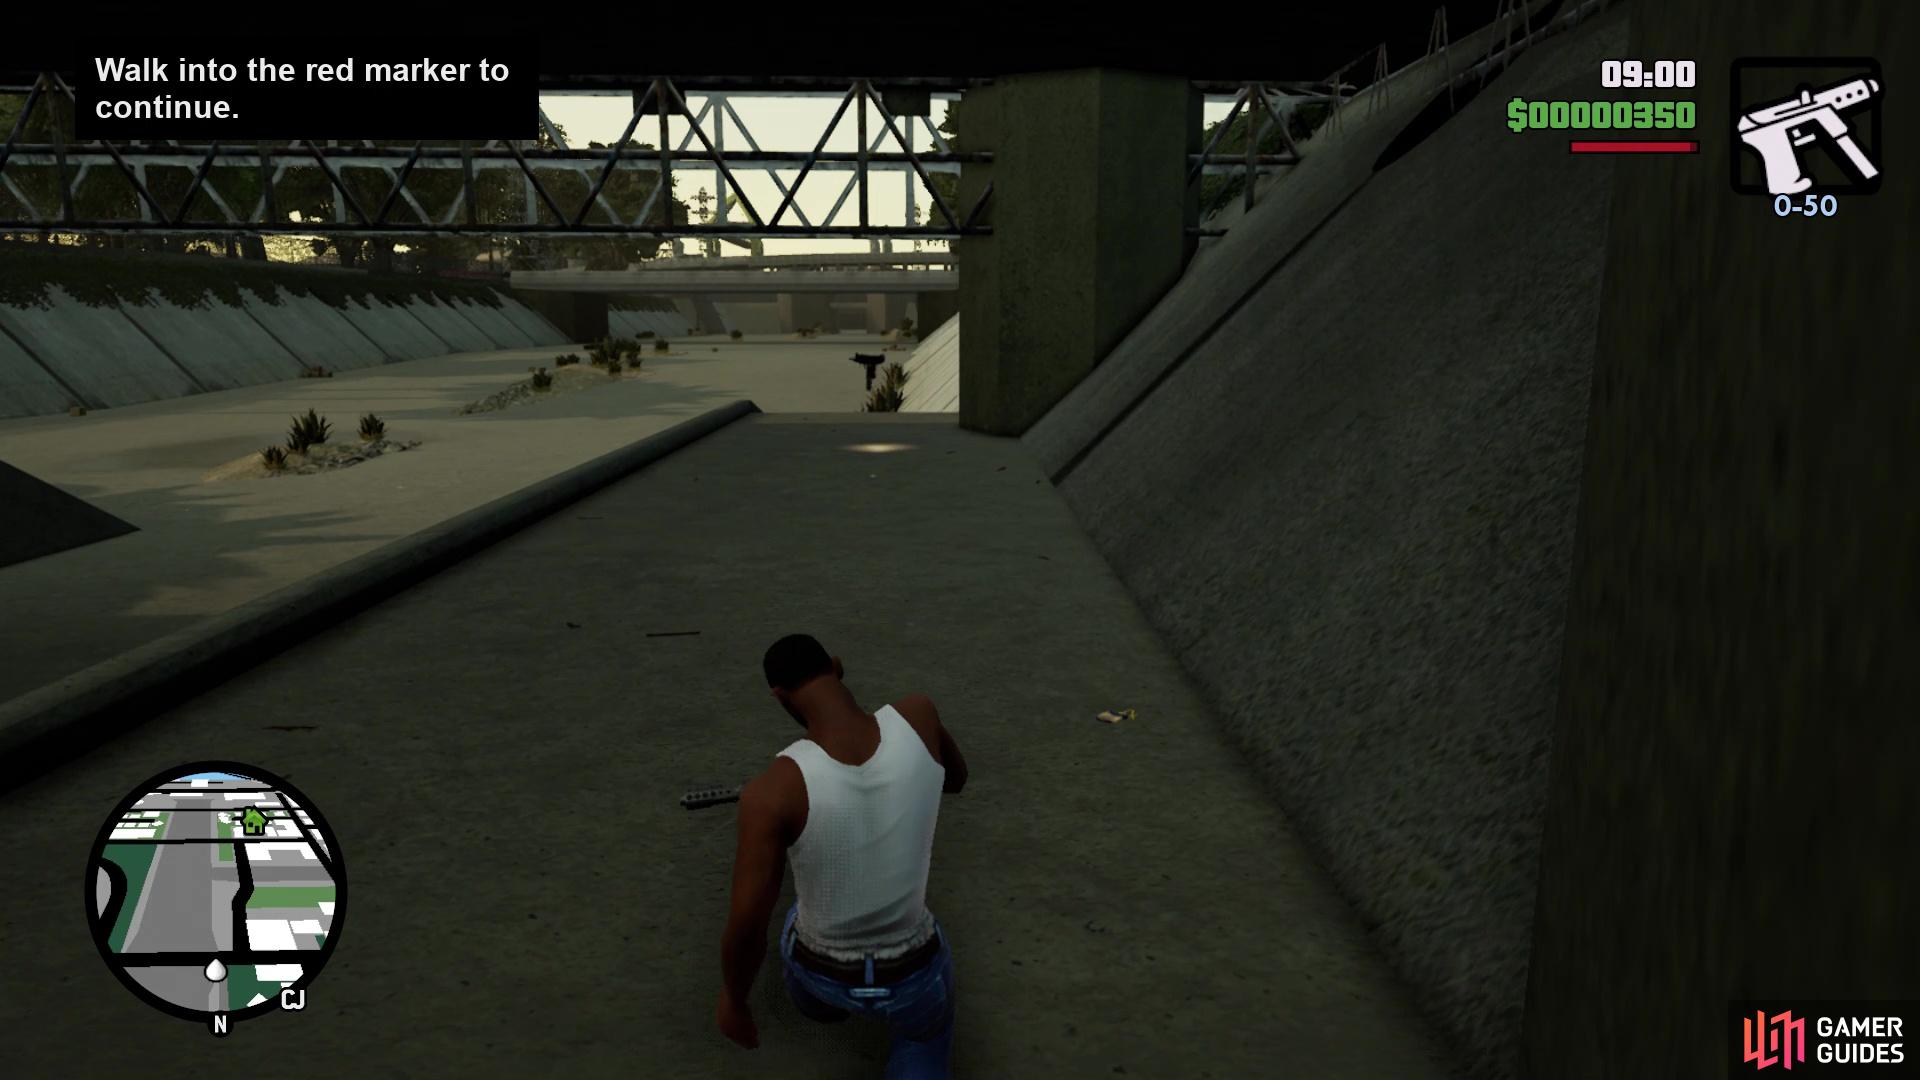 then look under the bridge right next to it to find this weapon pickup